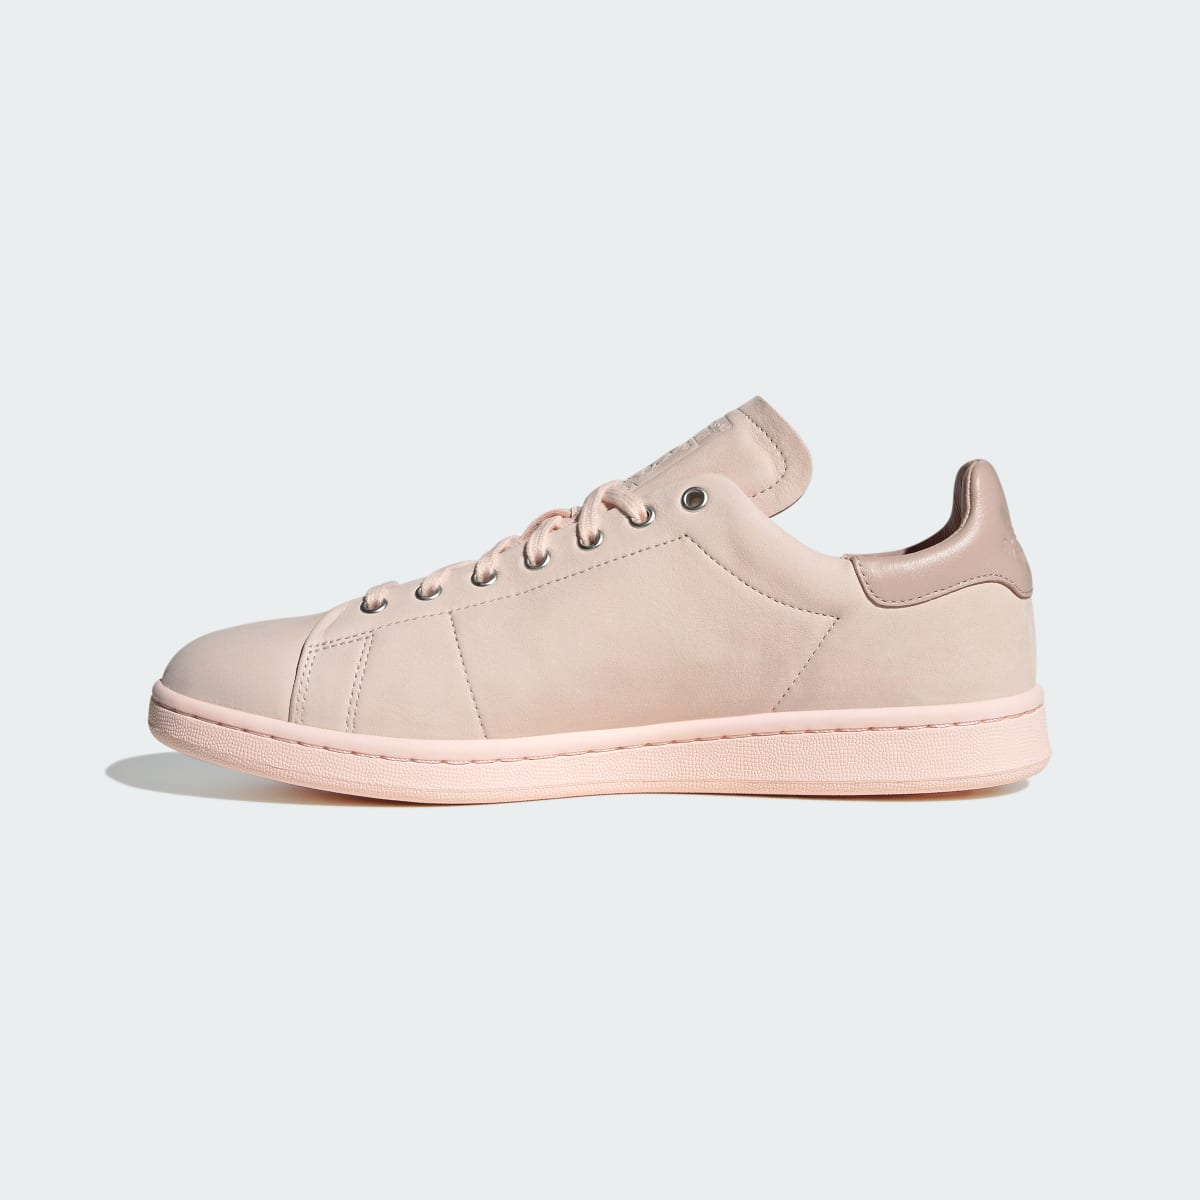 Adidas Chaussure Stan Smith Lux. 7